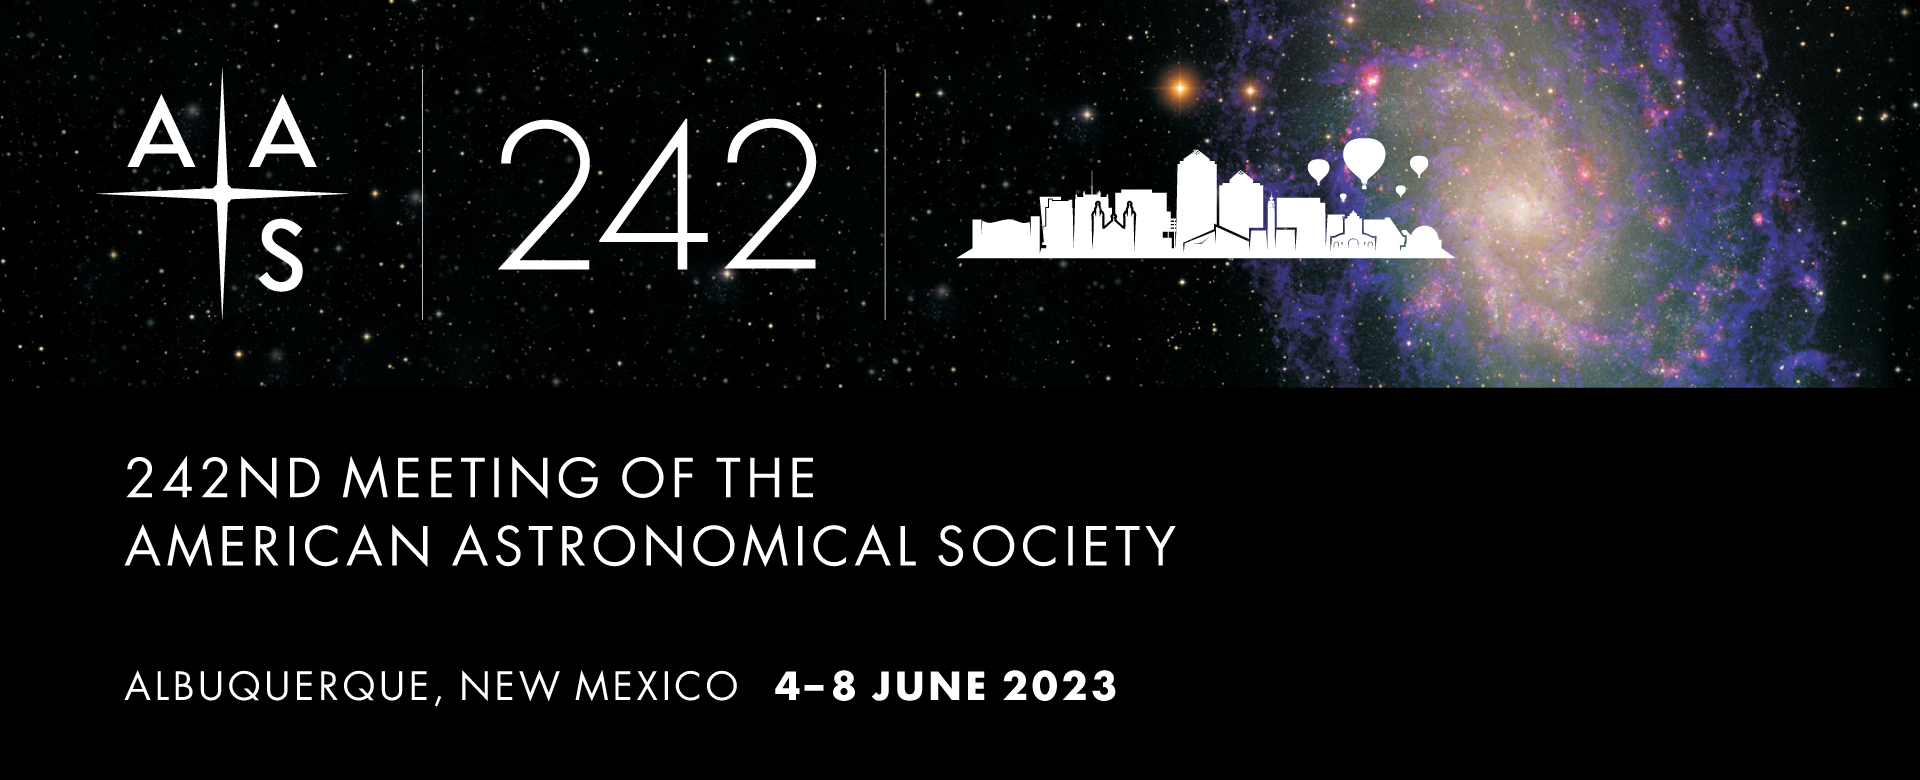 AAS 242 banner